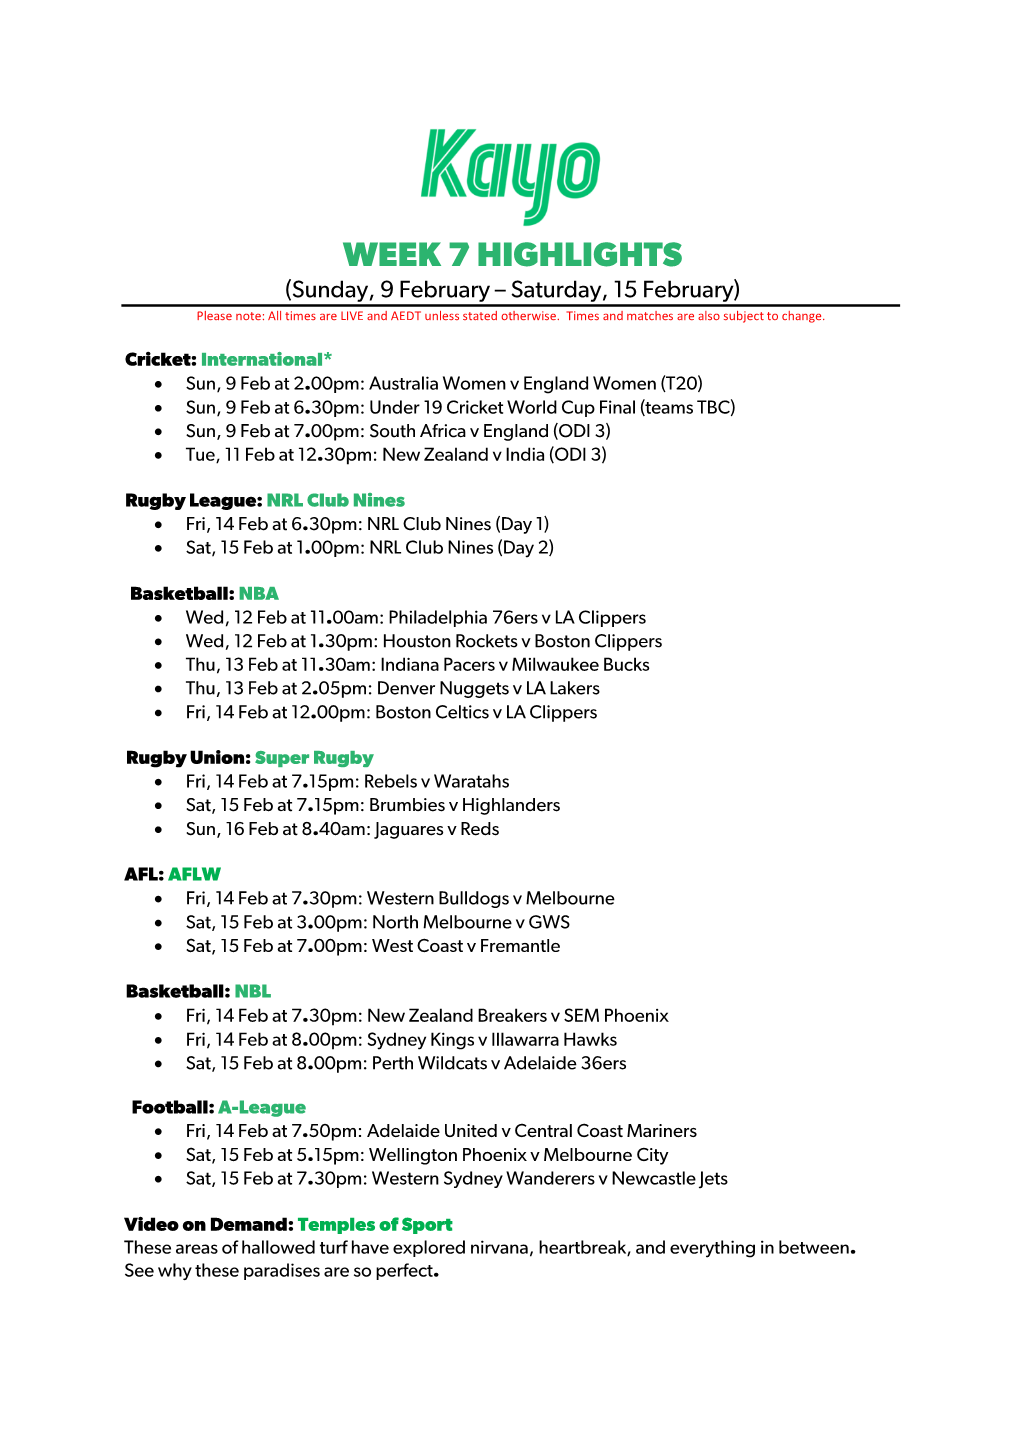 WEEK 7 HIGHLIGHTS (Sunday, 9 February – Saturday, 15 February) Please Note: All Times Are LIVE and AEDT Unless Stated Otherwise